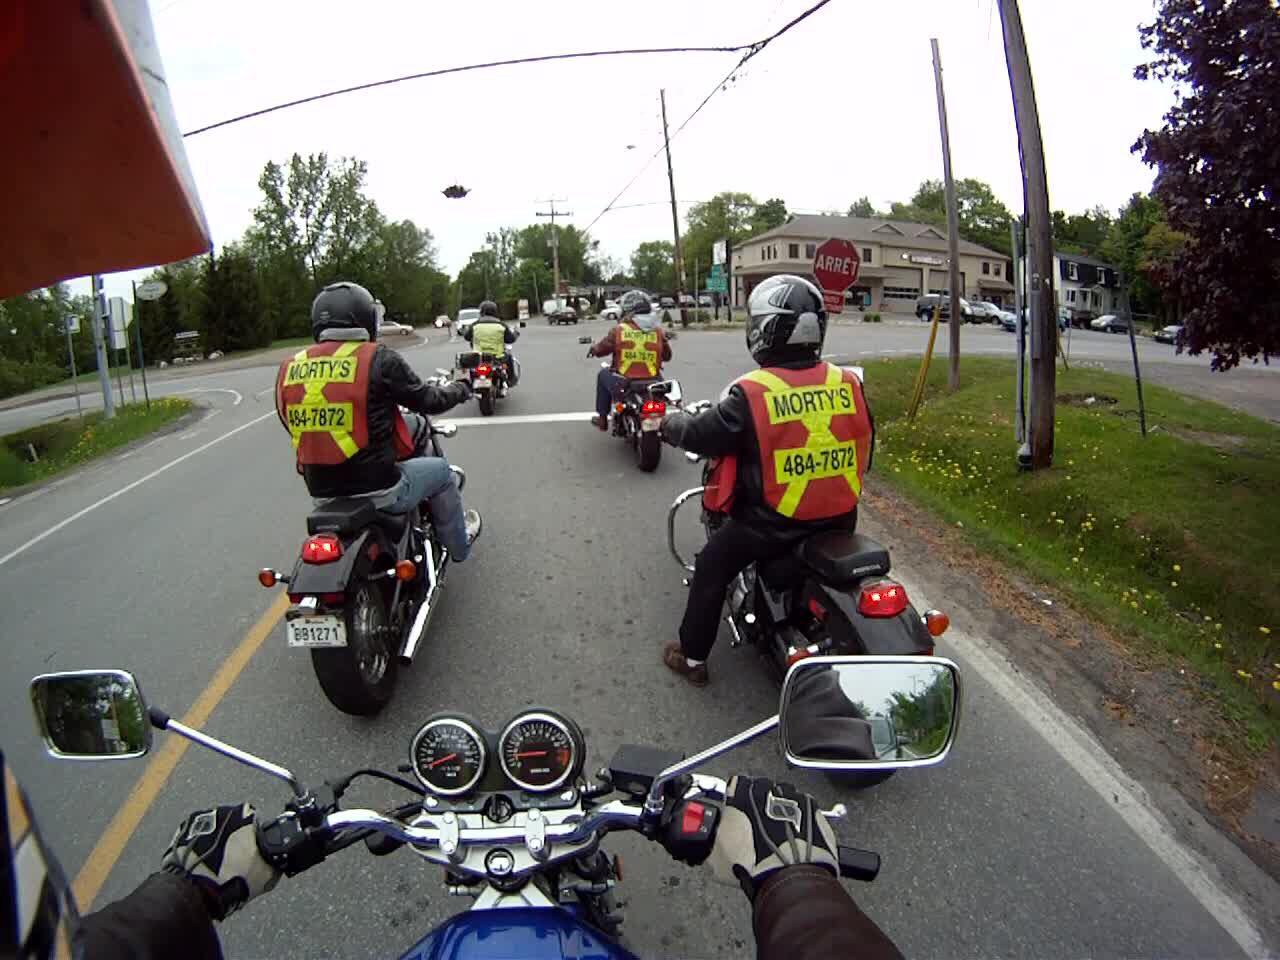 Getting Your Motorcycle License